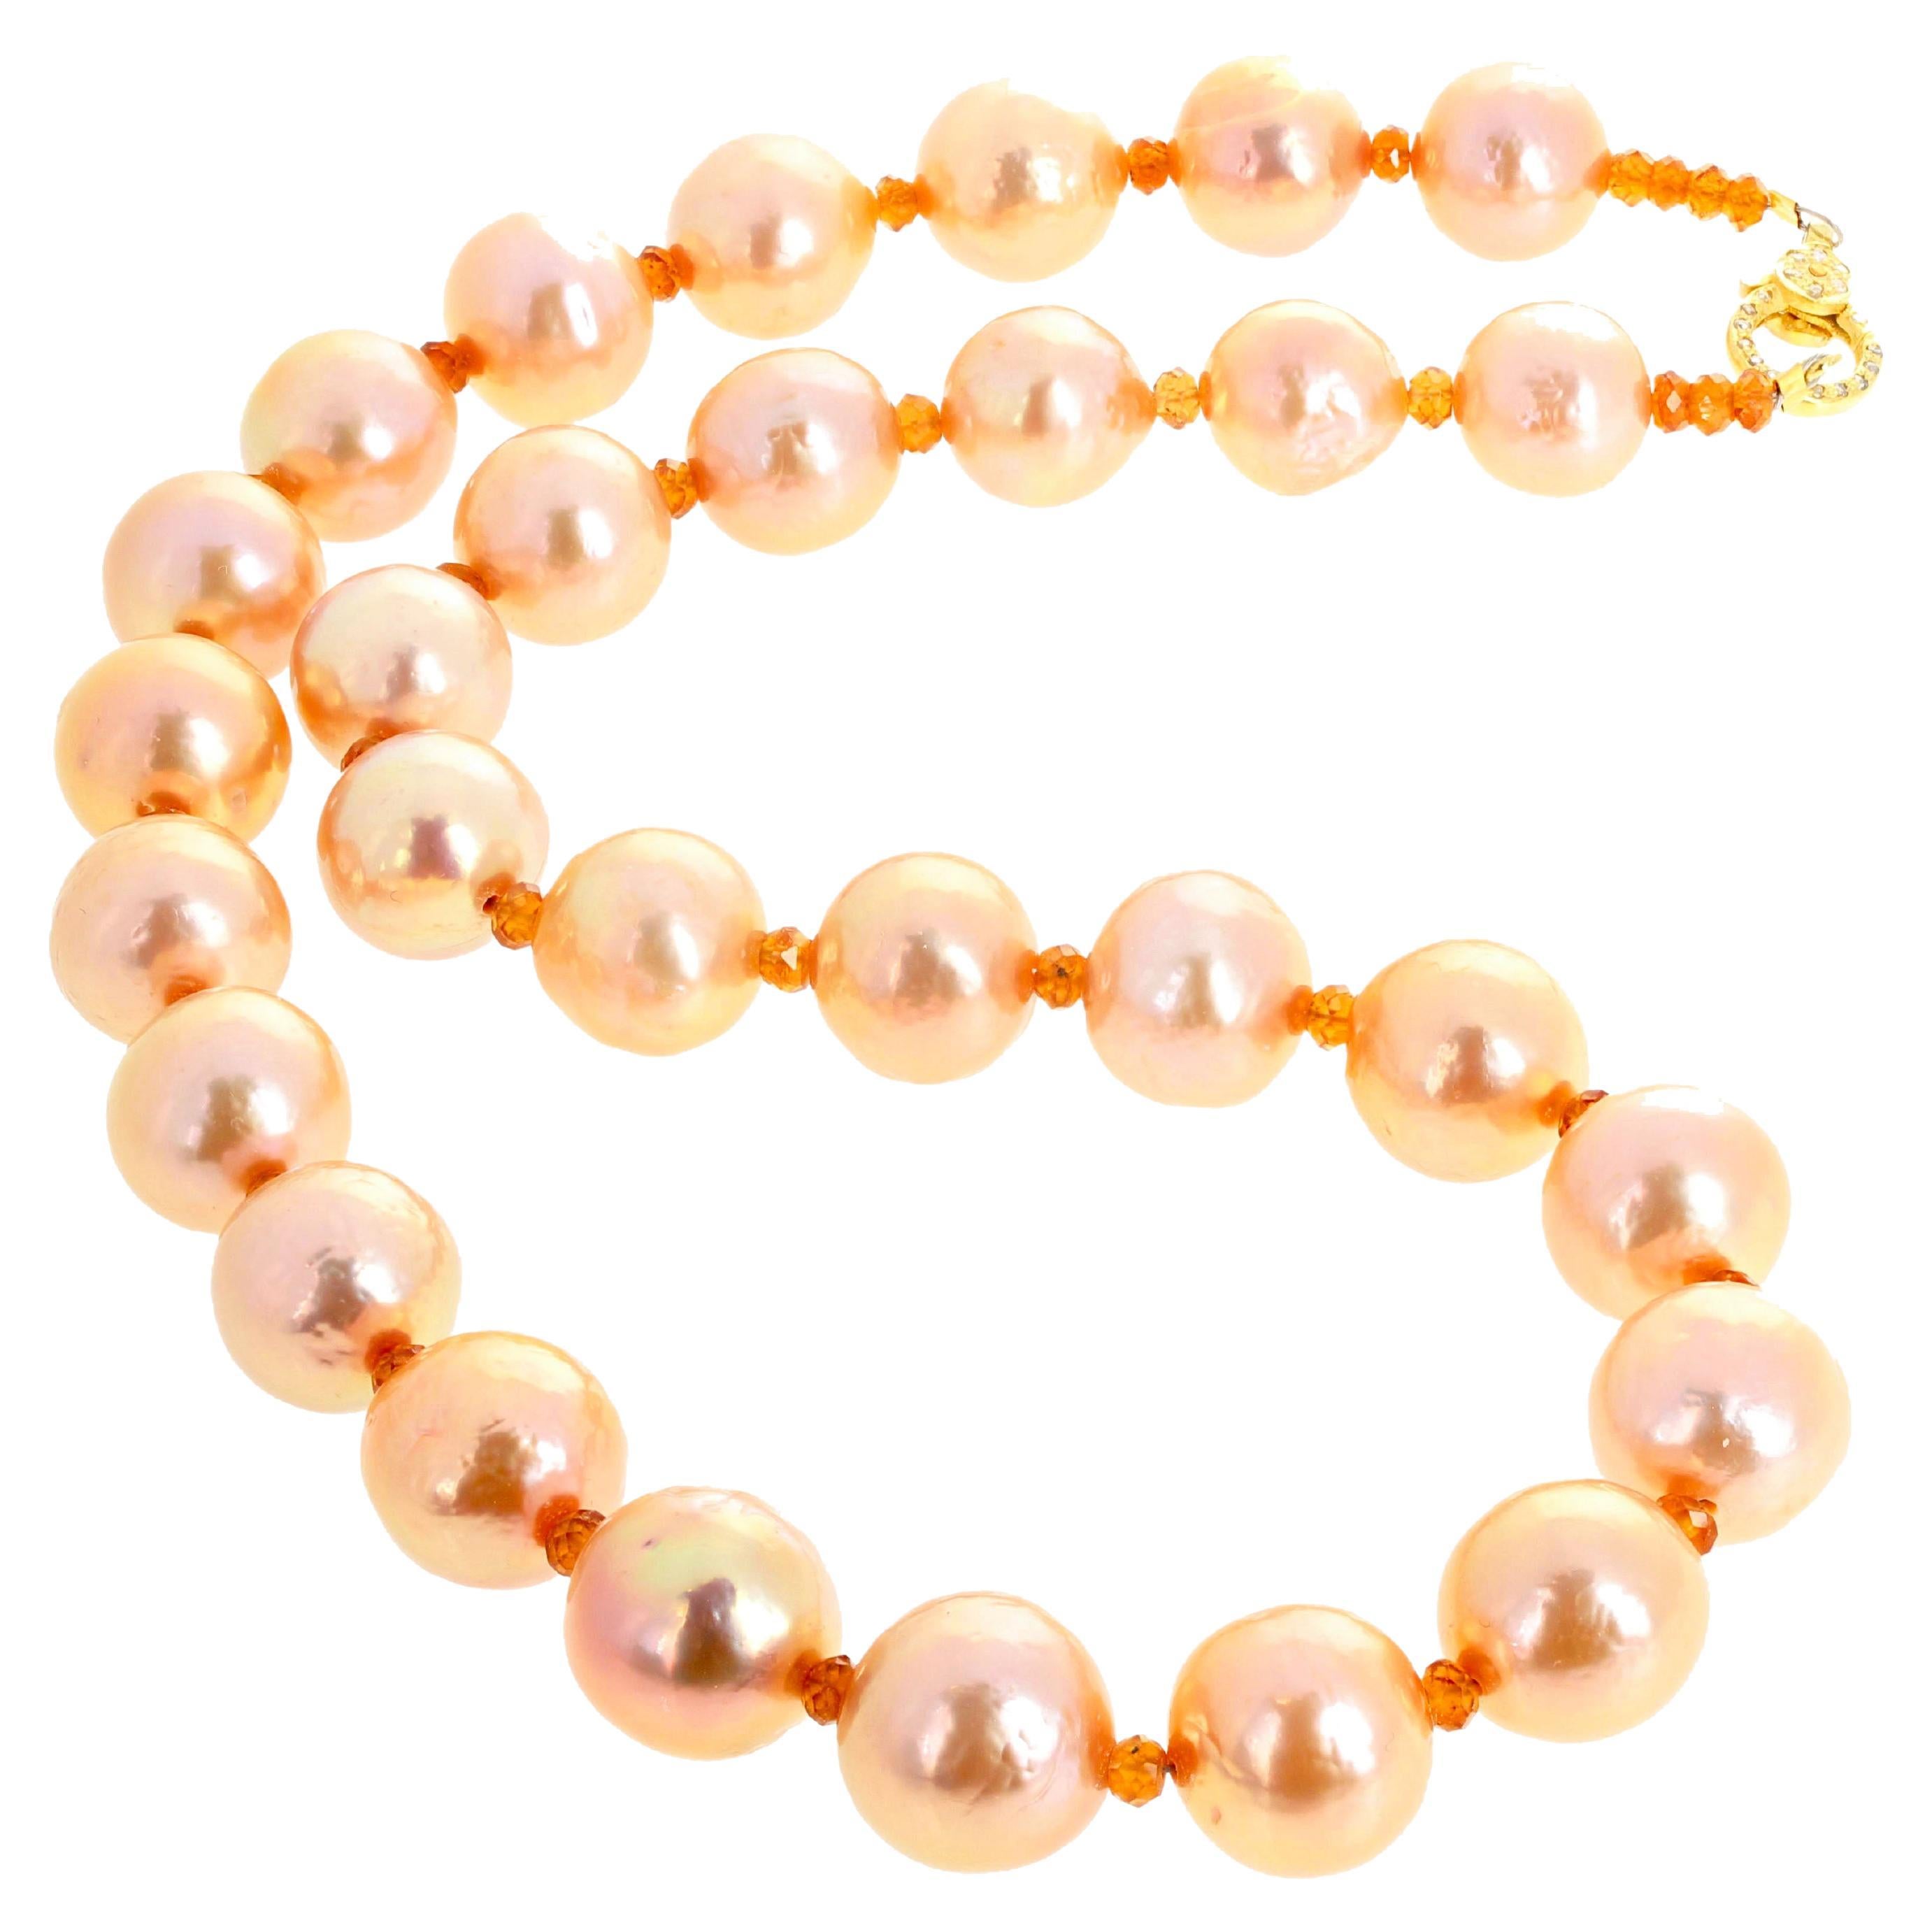 AJD RARE Peachy Glowing Ocean NATURAL Pearls Necklace & Matching Earrings Set For Sale